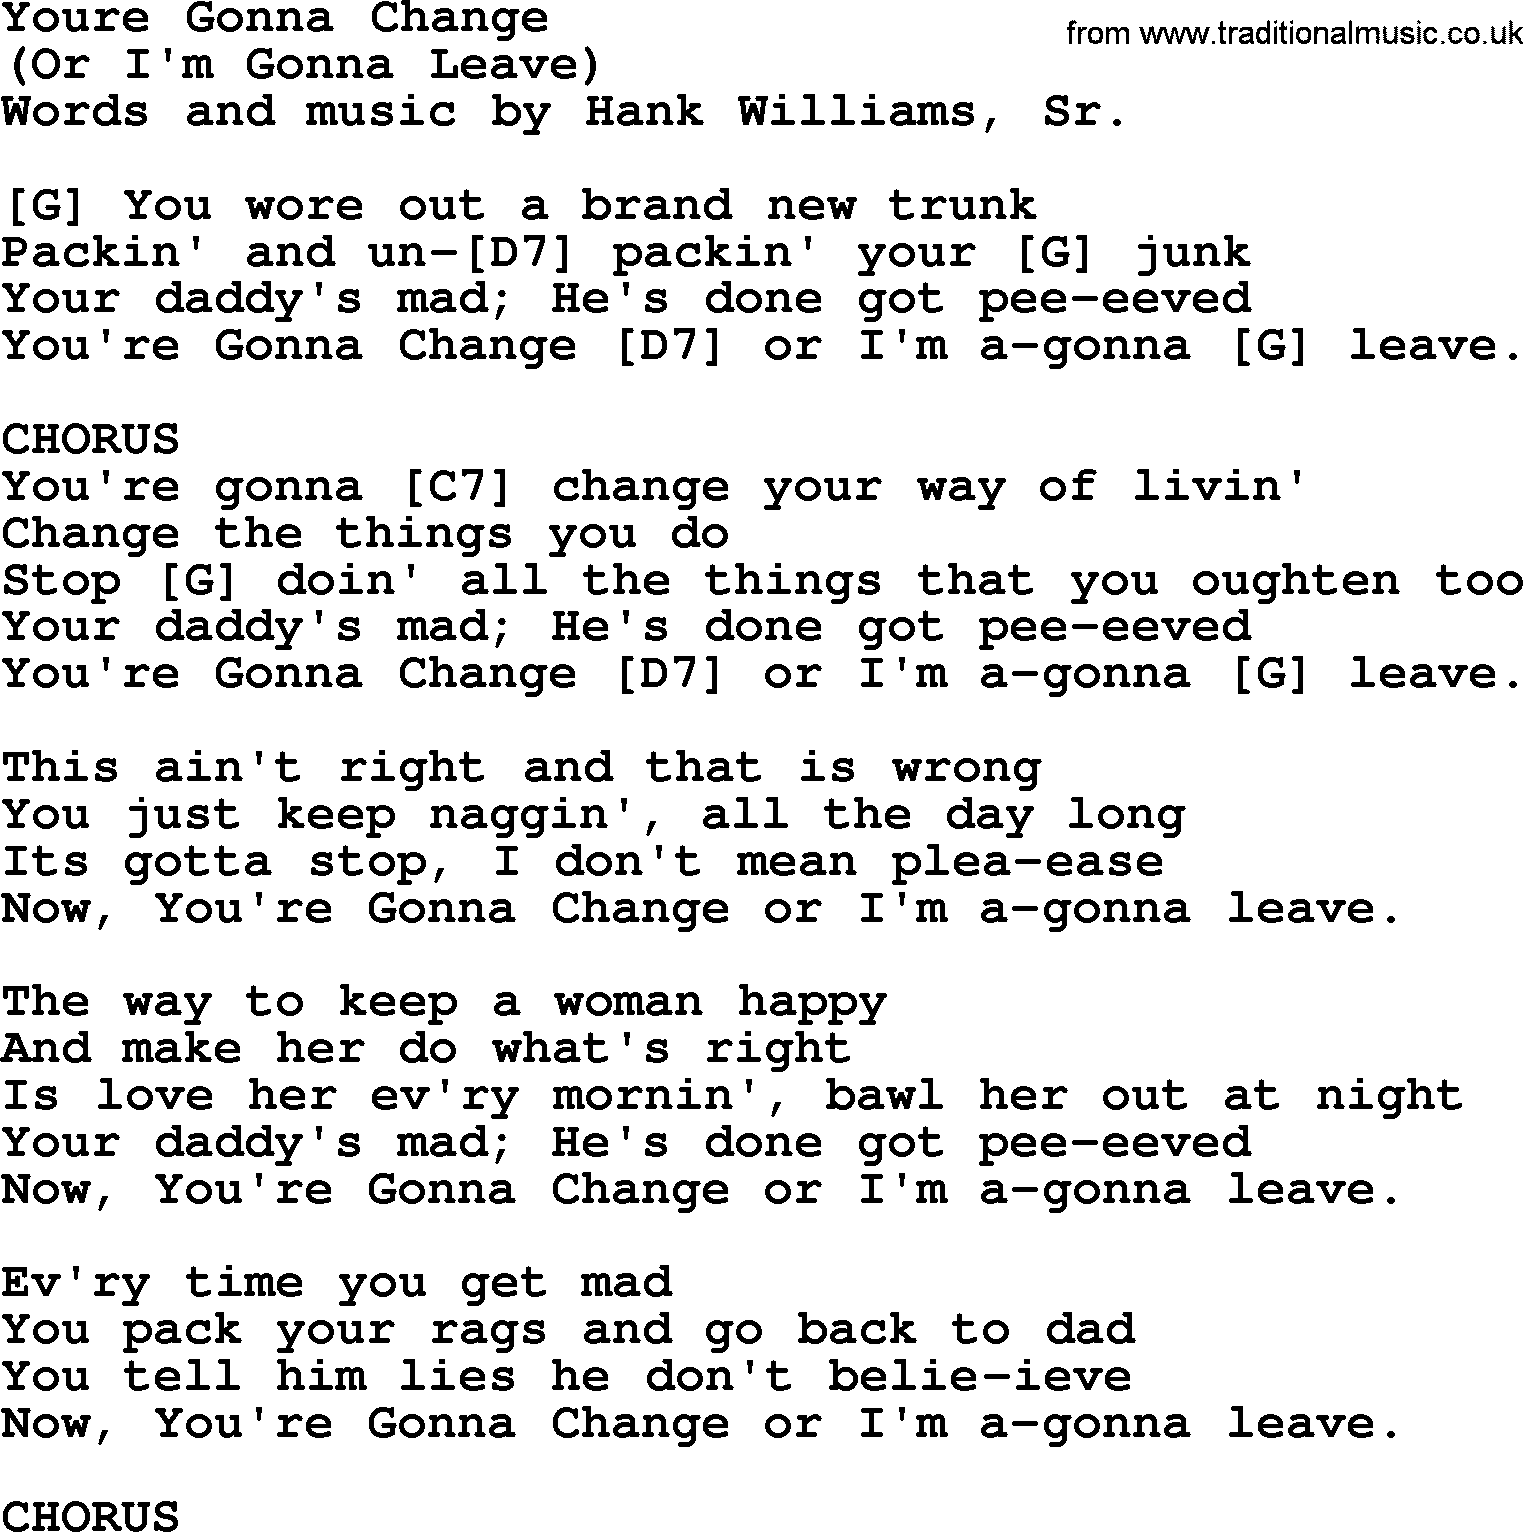 Hank Williams song Youre Gonna Change, lyrics and chords